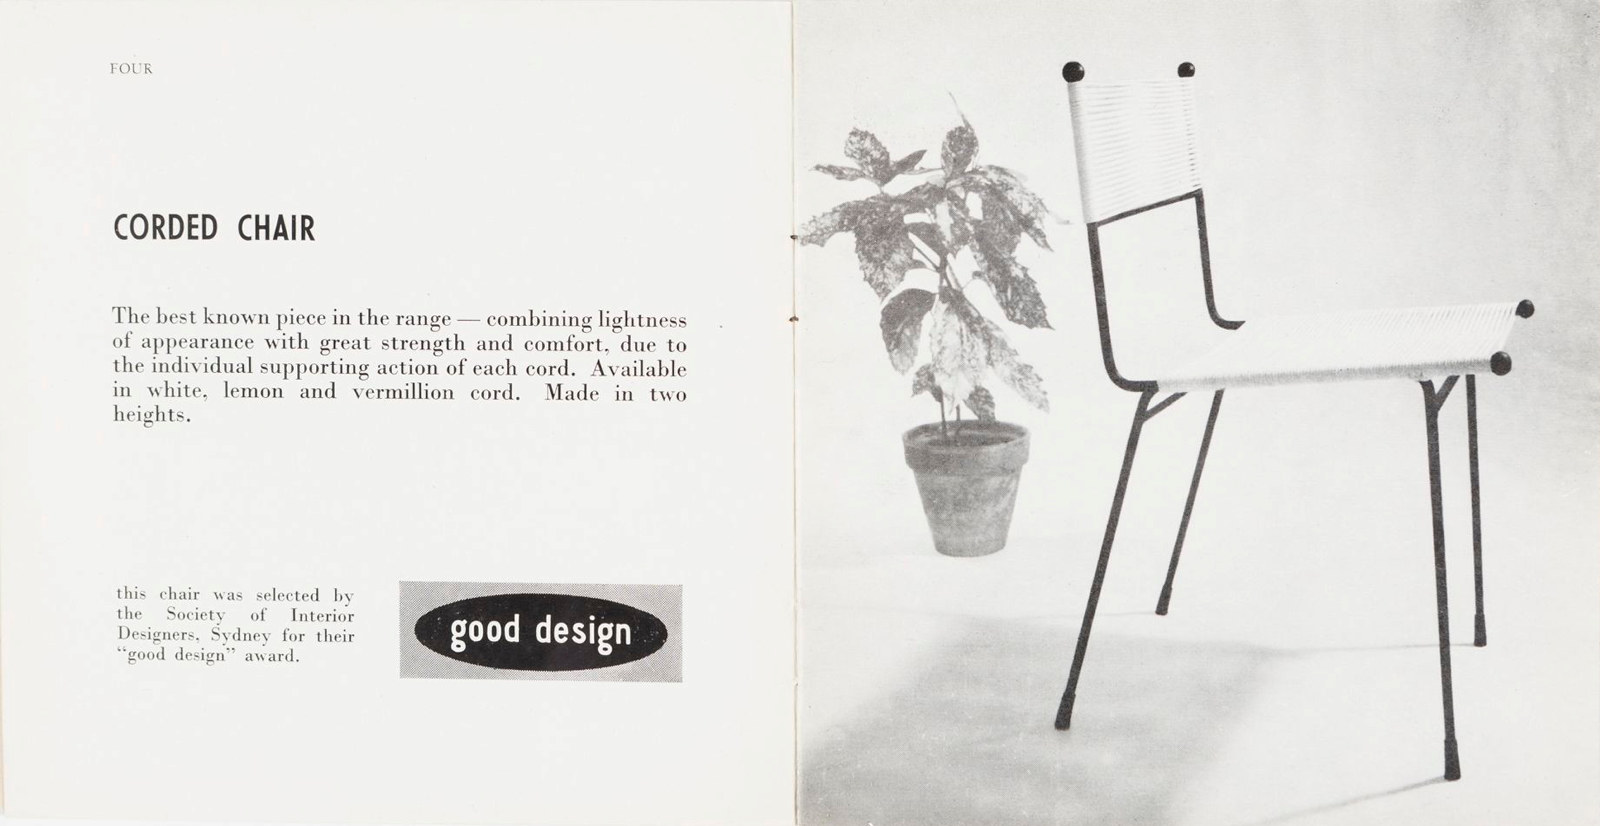 Corded chair, in A catalogue of contemporary furniture by Meadmore Originals / Meadmore Originals [trade catalogue], c1953